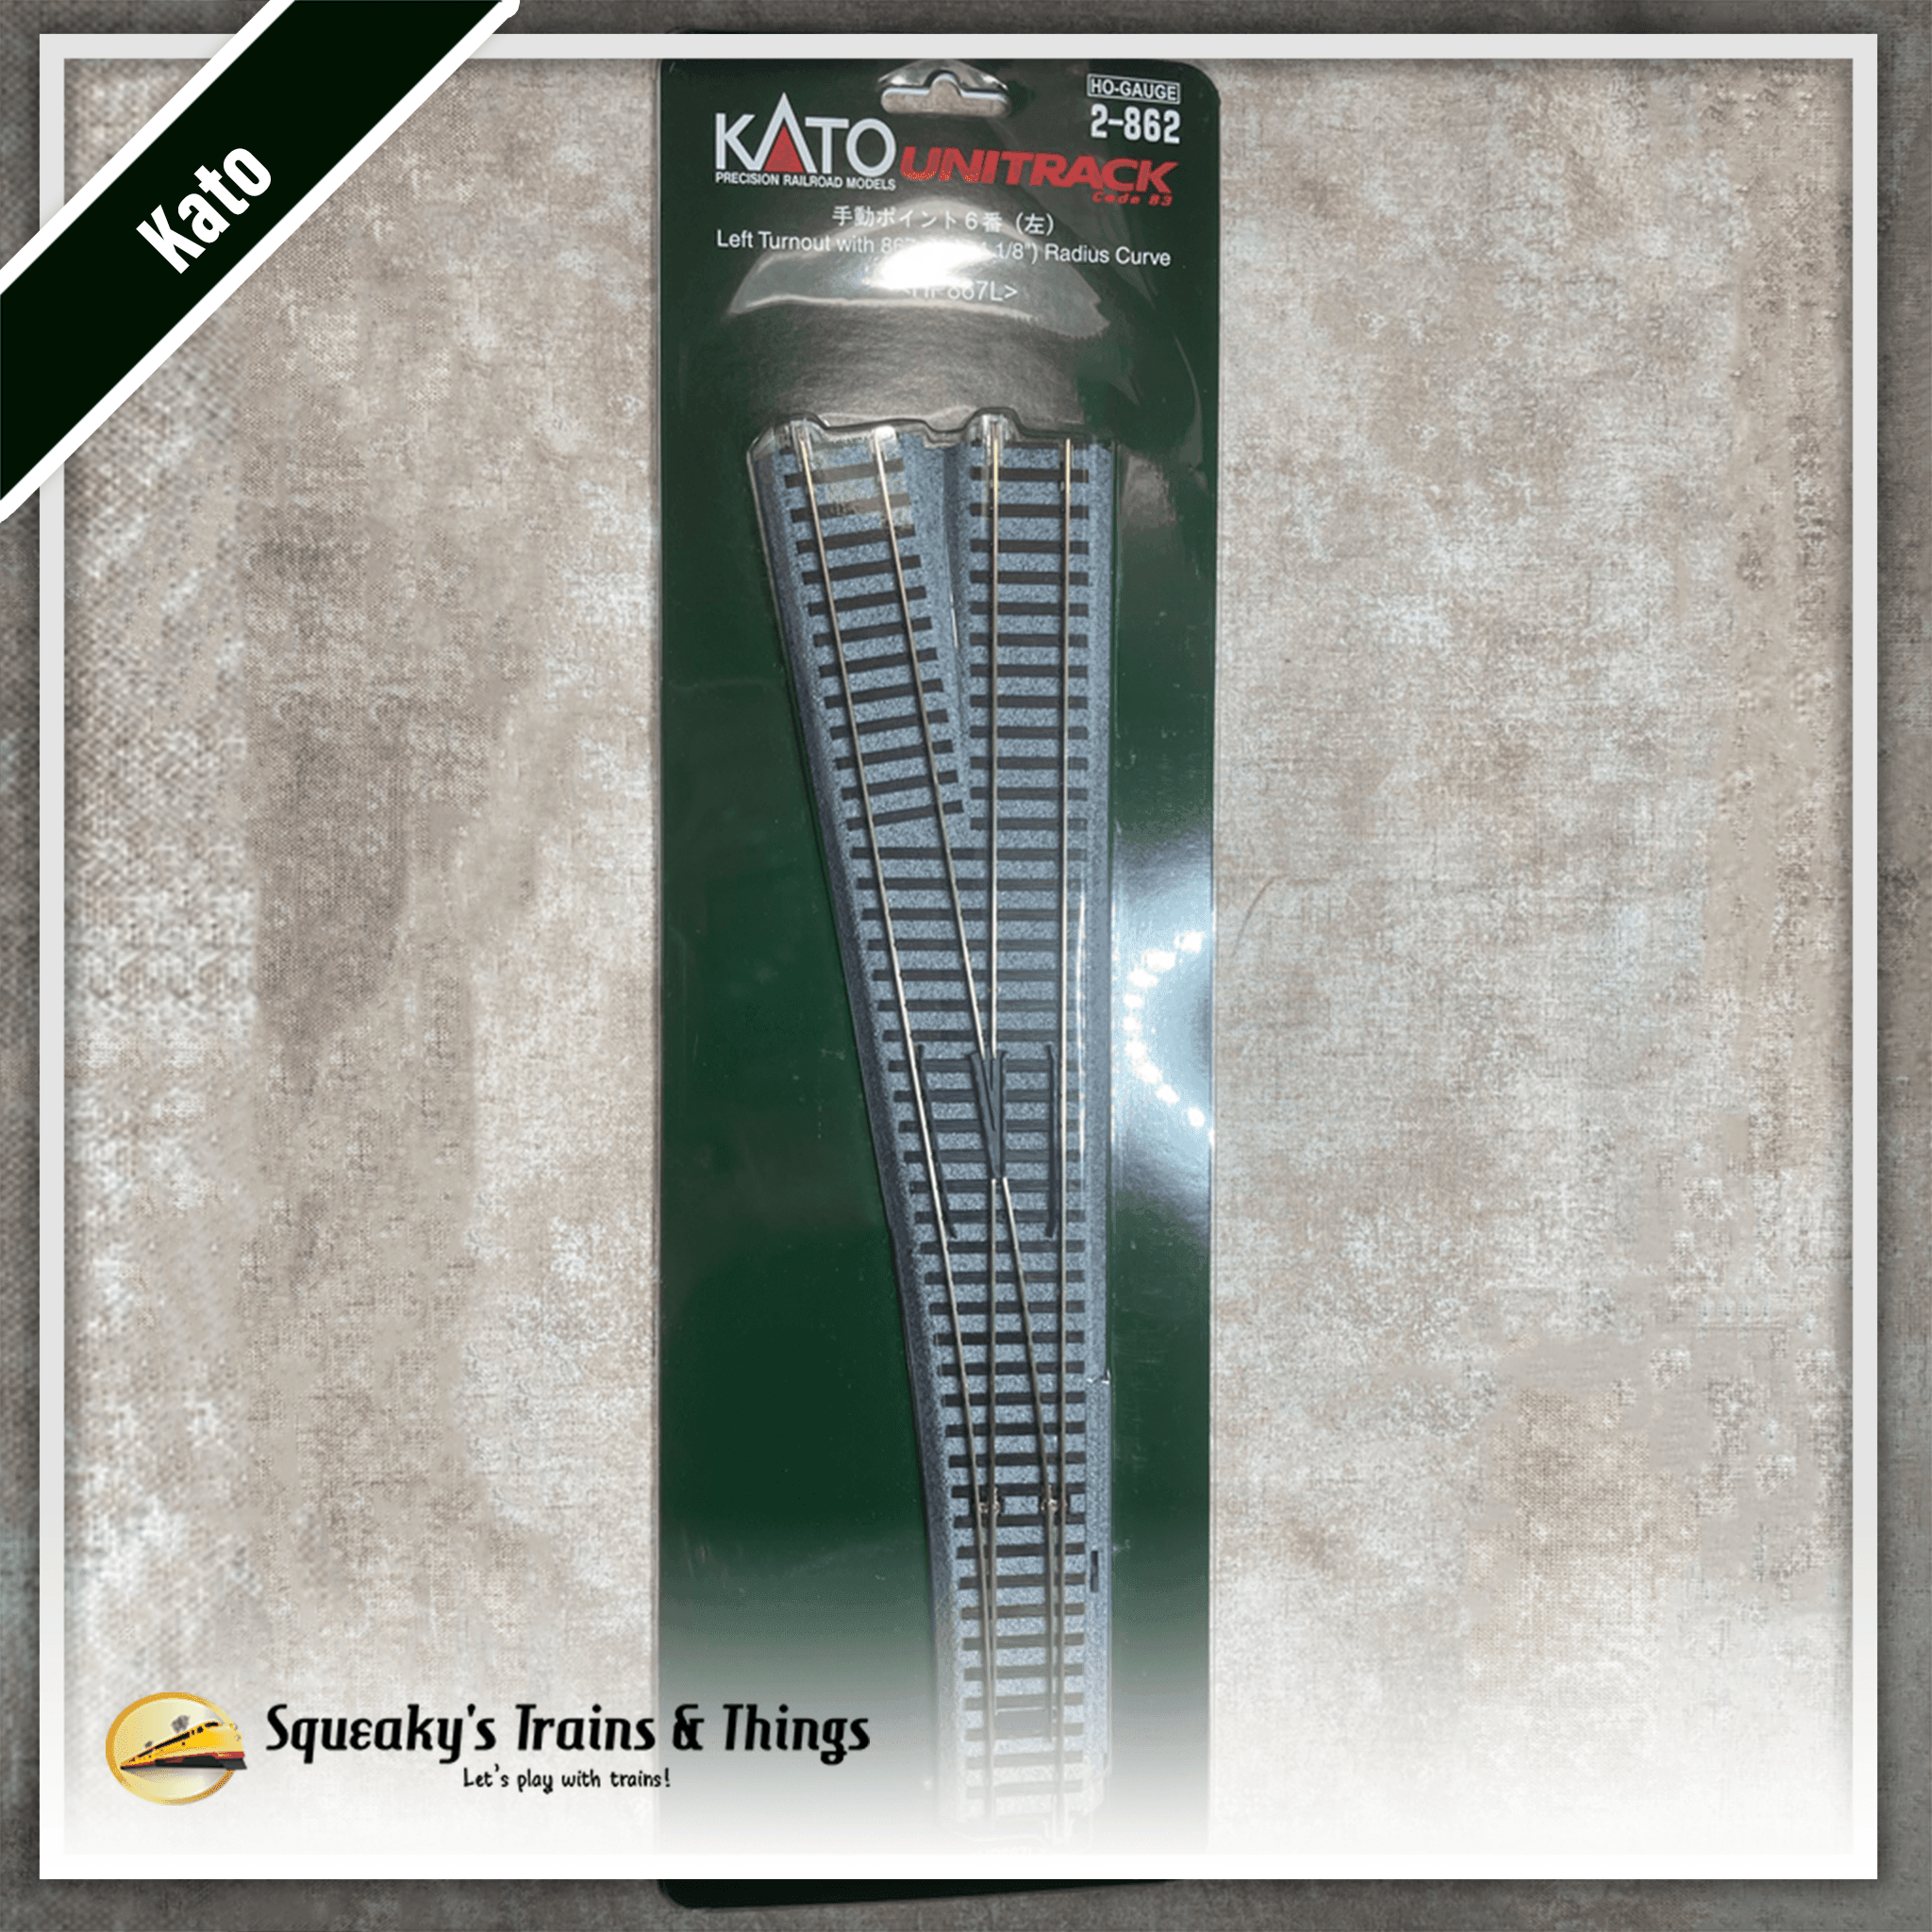 Kato 2862 | Unitrack #6 492mm (19 3/8") Manual Left Turnout with 867mm (34 1/8") Radius Curve. | HO Scale